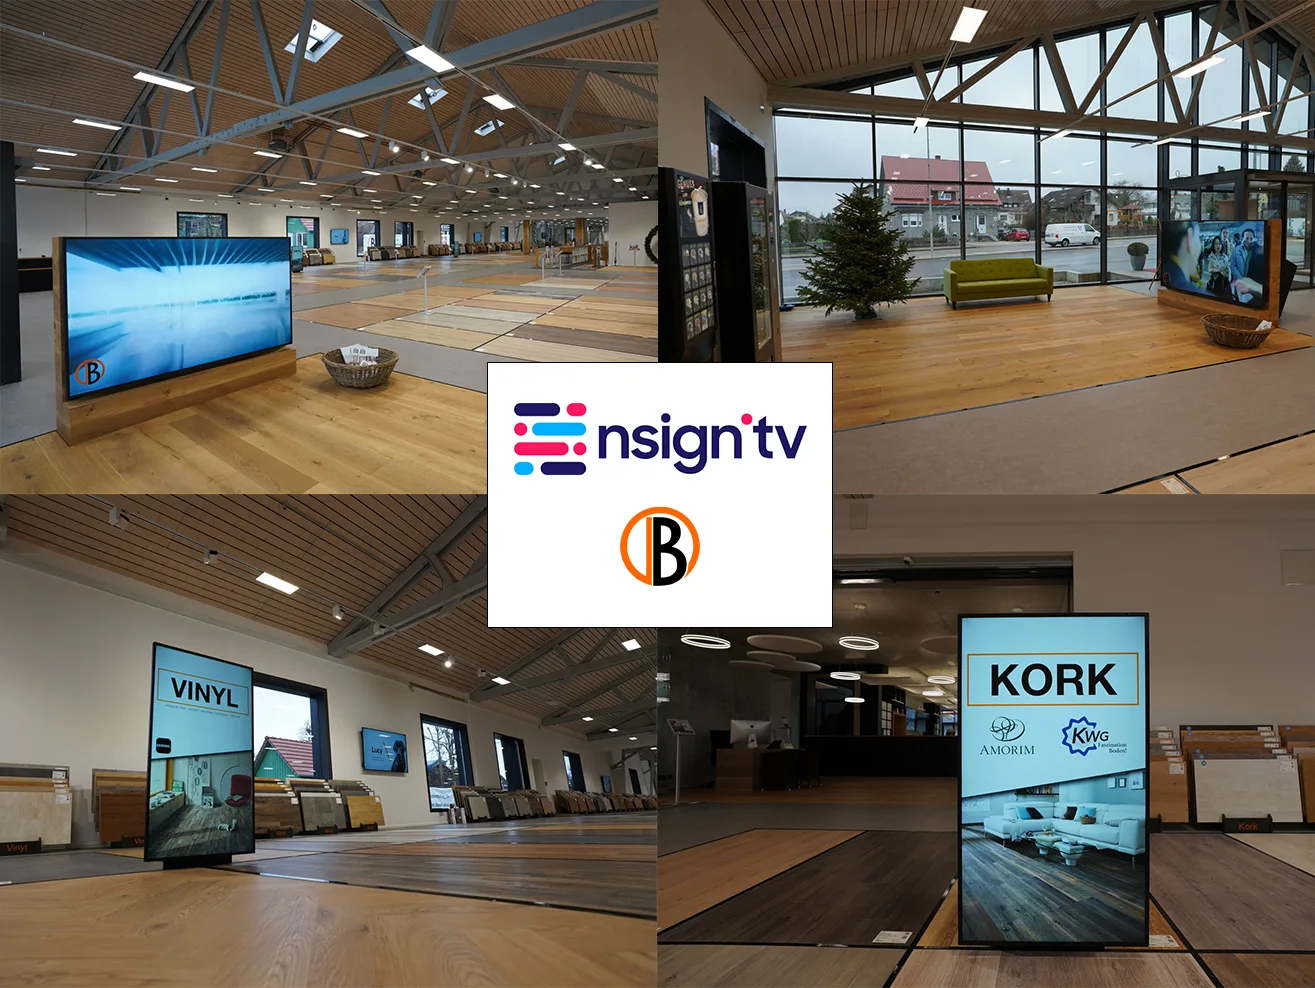 historic german retailer modernizes customer experience with digital signage from nsign.tv